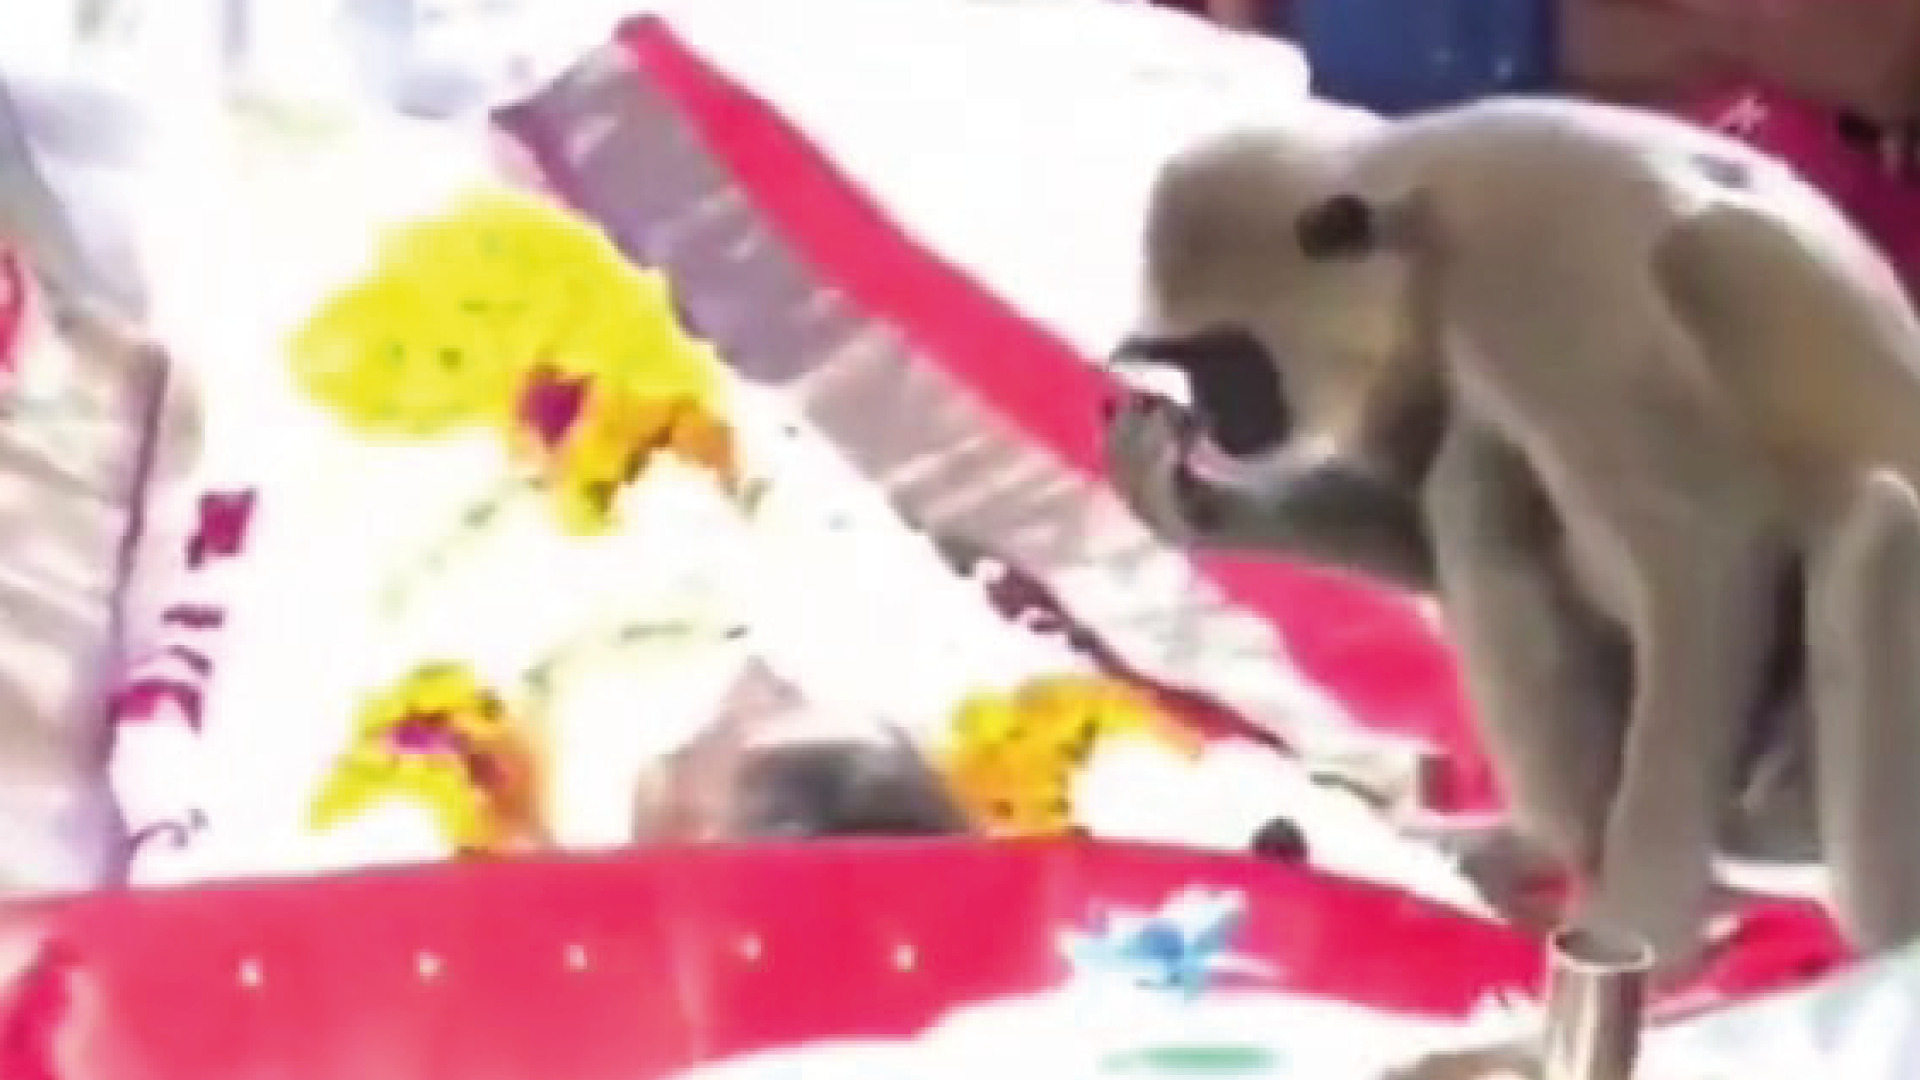 Monkey says goodbye to his human friend at his funeral.